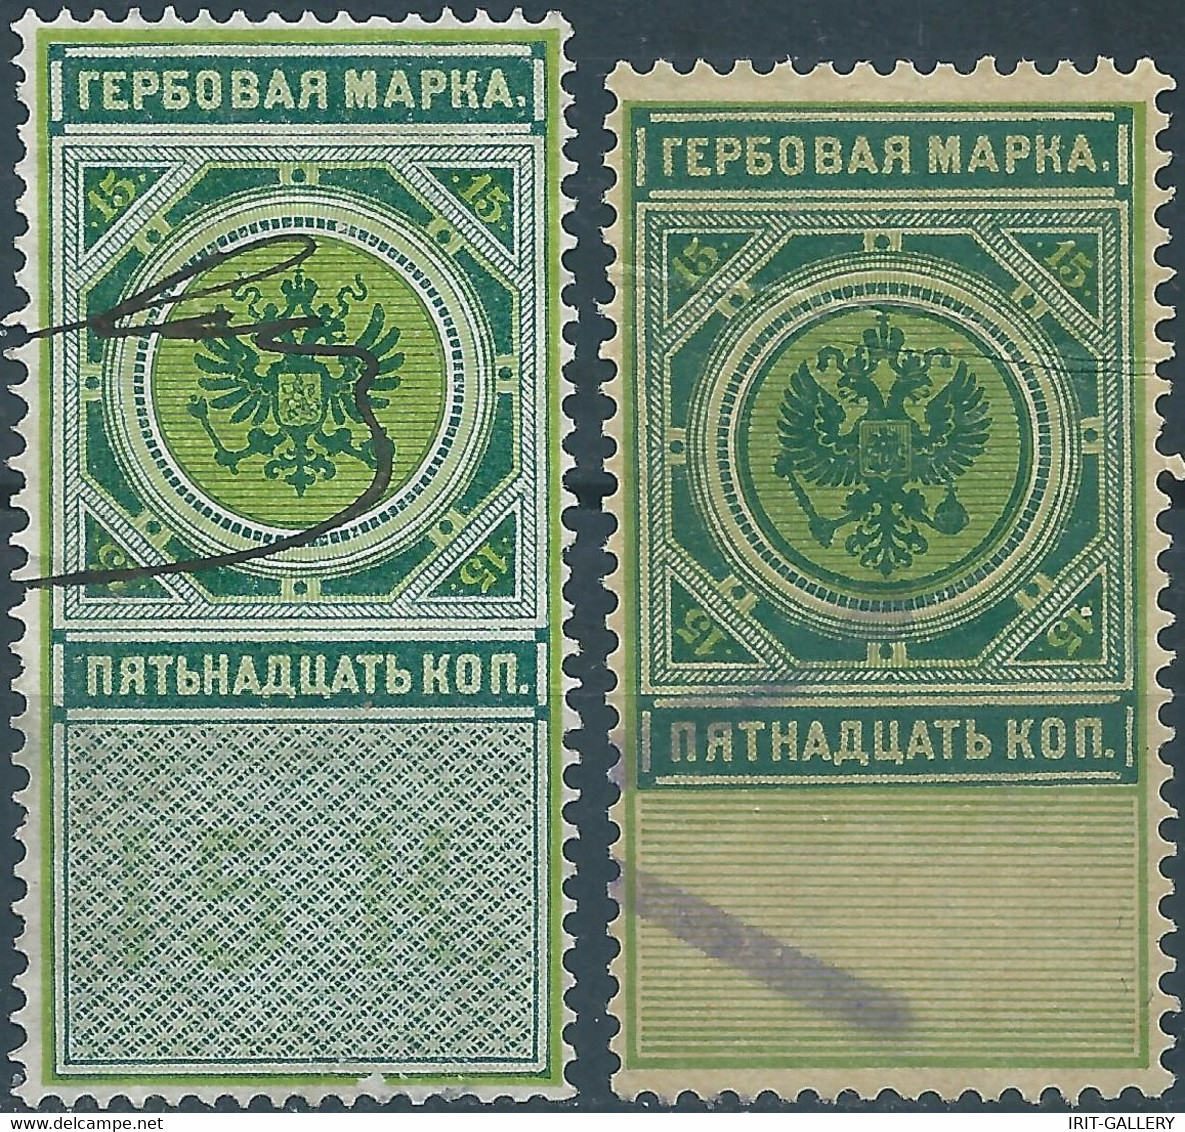 Russia - Russie - Russland,1886-1890 Revenue Stamps Fiscal Tax 15kop,1st And 2nd Issue, Different In Size And Color,used - Fiscali